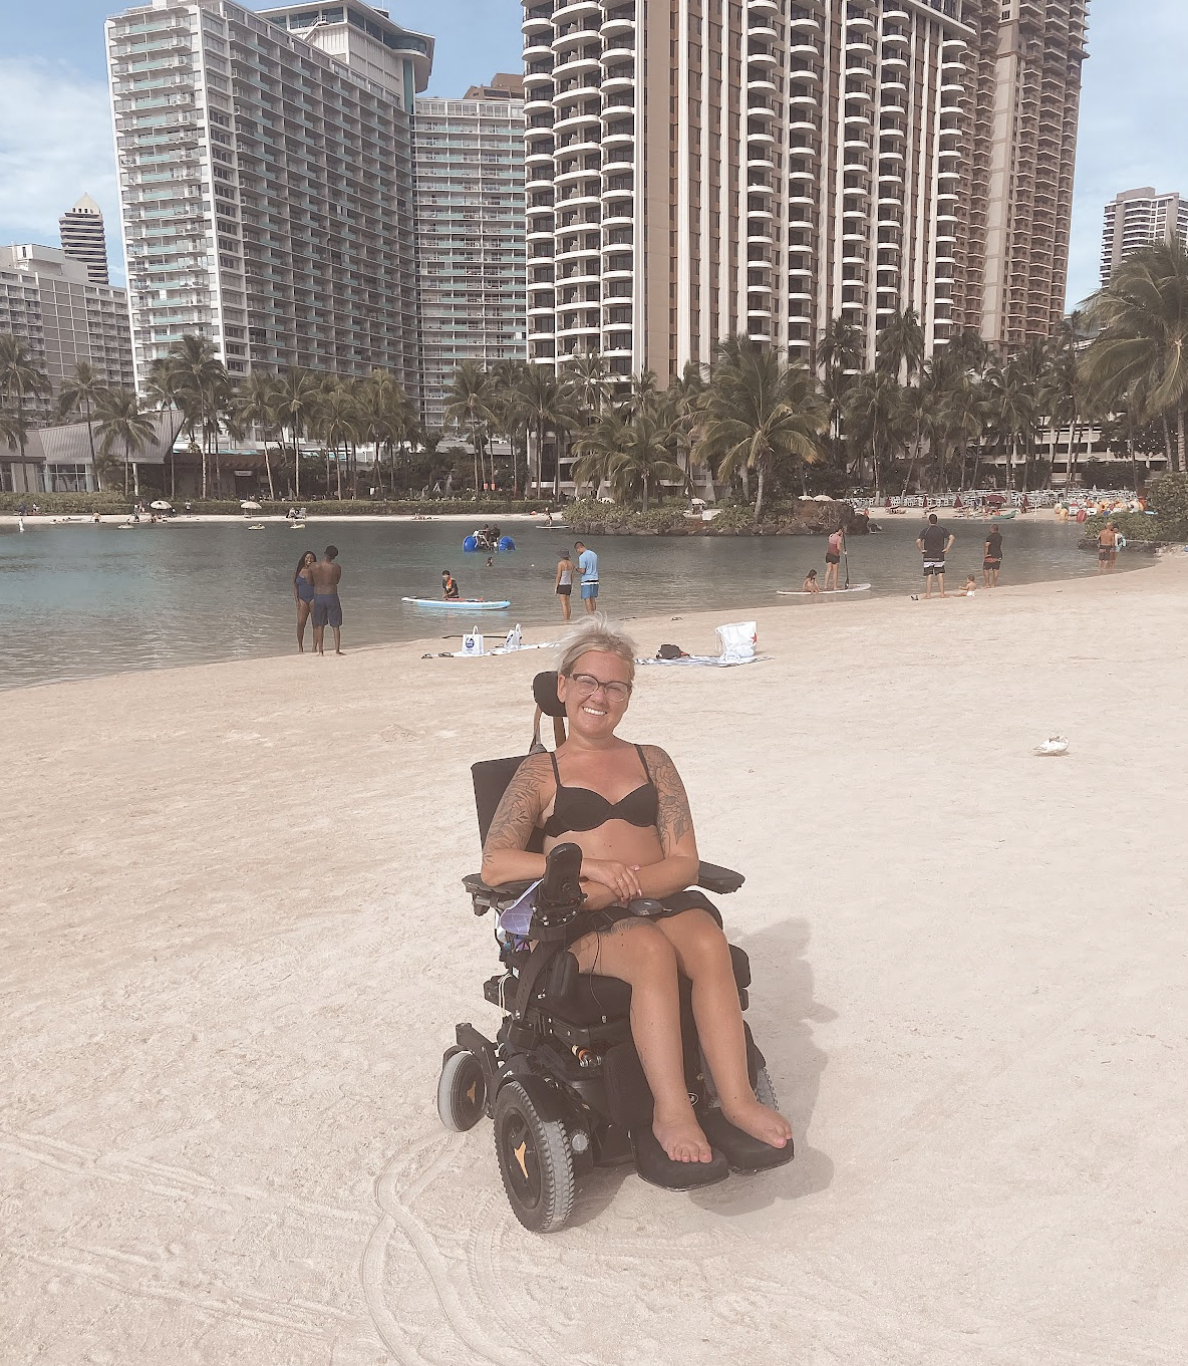 Shailynn sitting on her wheelchair. She is at the beach, wearing a black bikini and eye glasses. Behind her is a lagon and a high-terrace building. There are people in the lagoon.